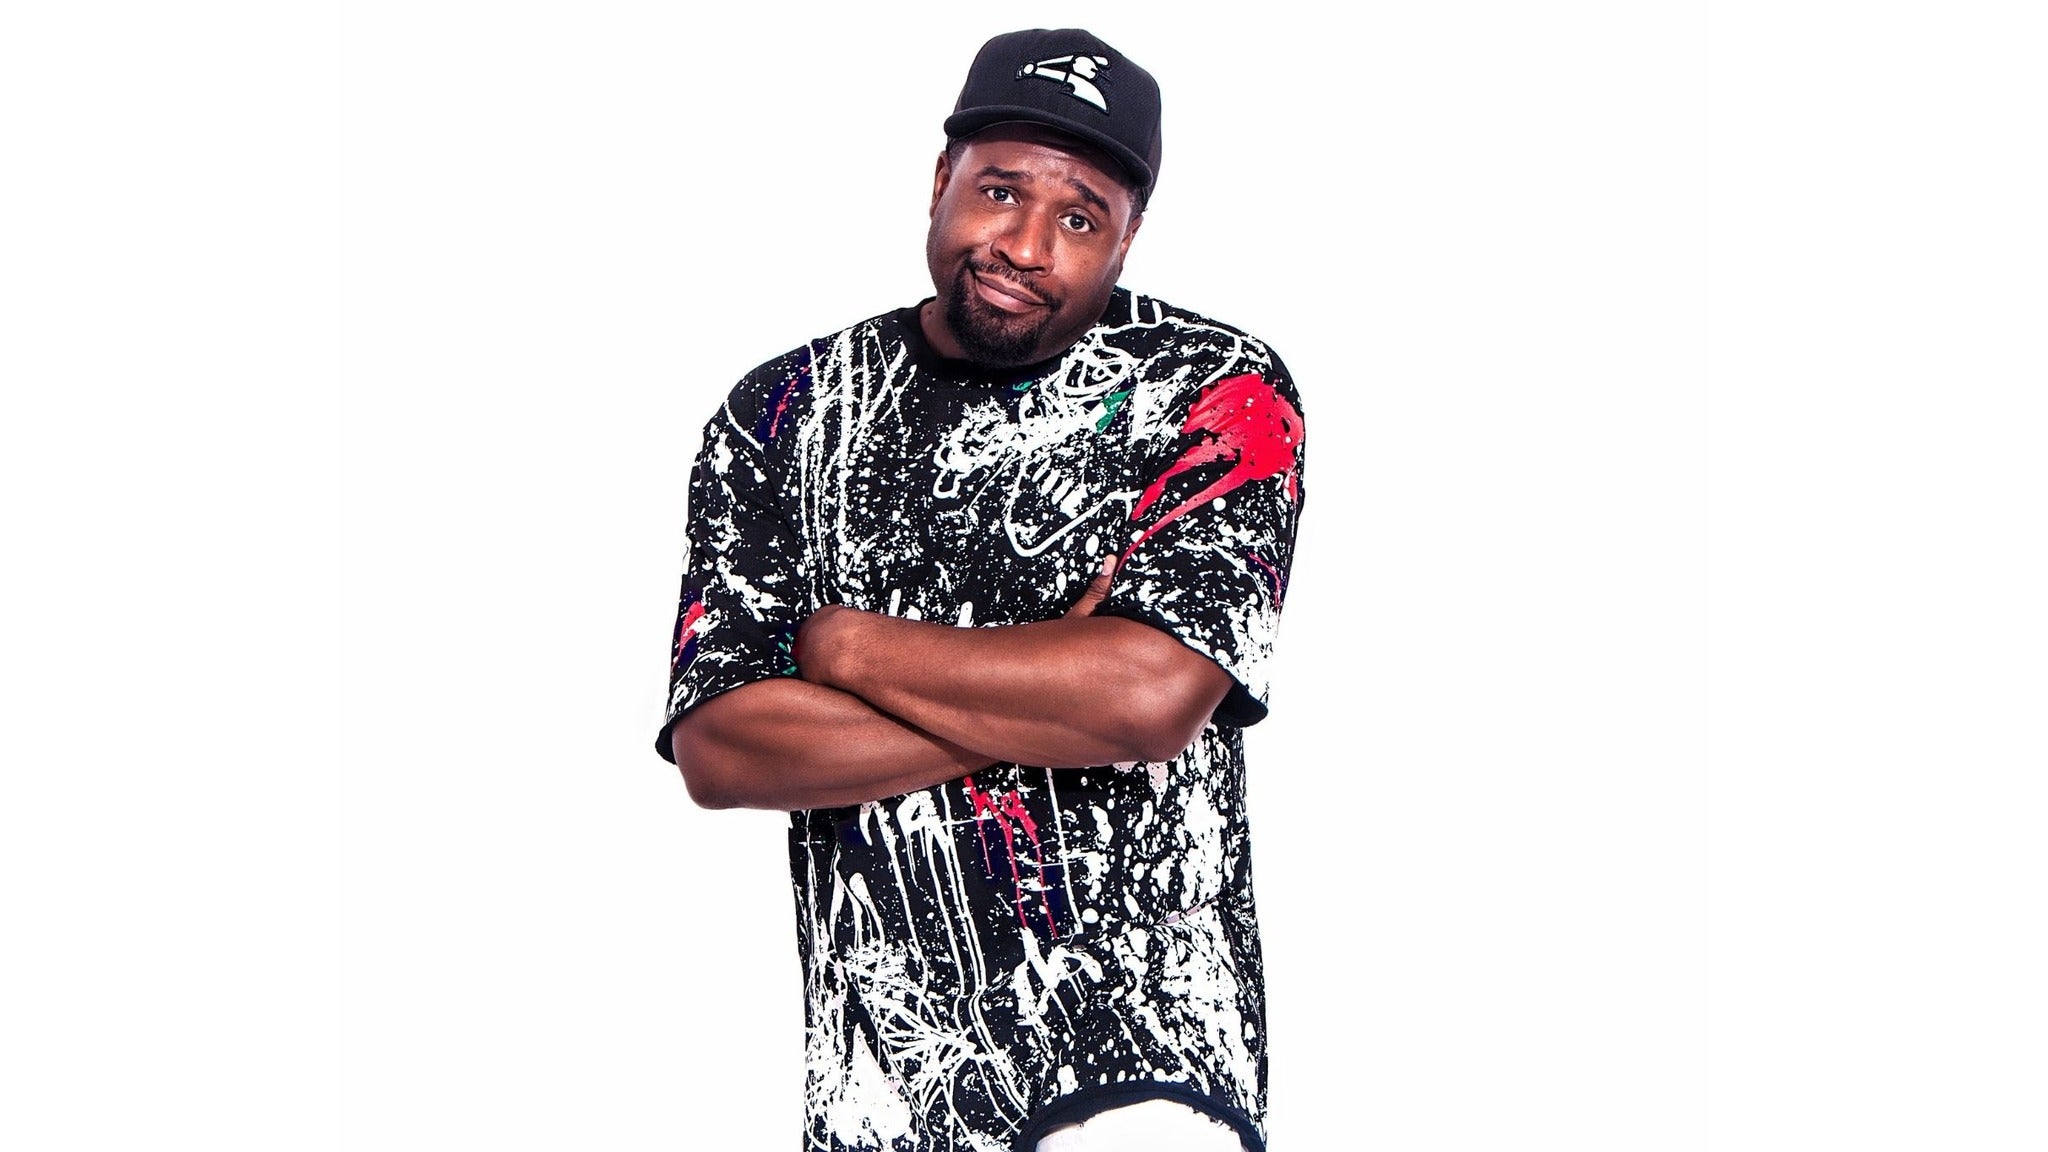 The Corey Holcomb 5150 Super Comedy Show & Review presale code for early tickets in Chicago